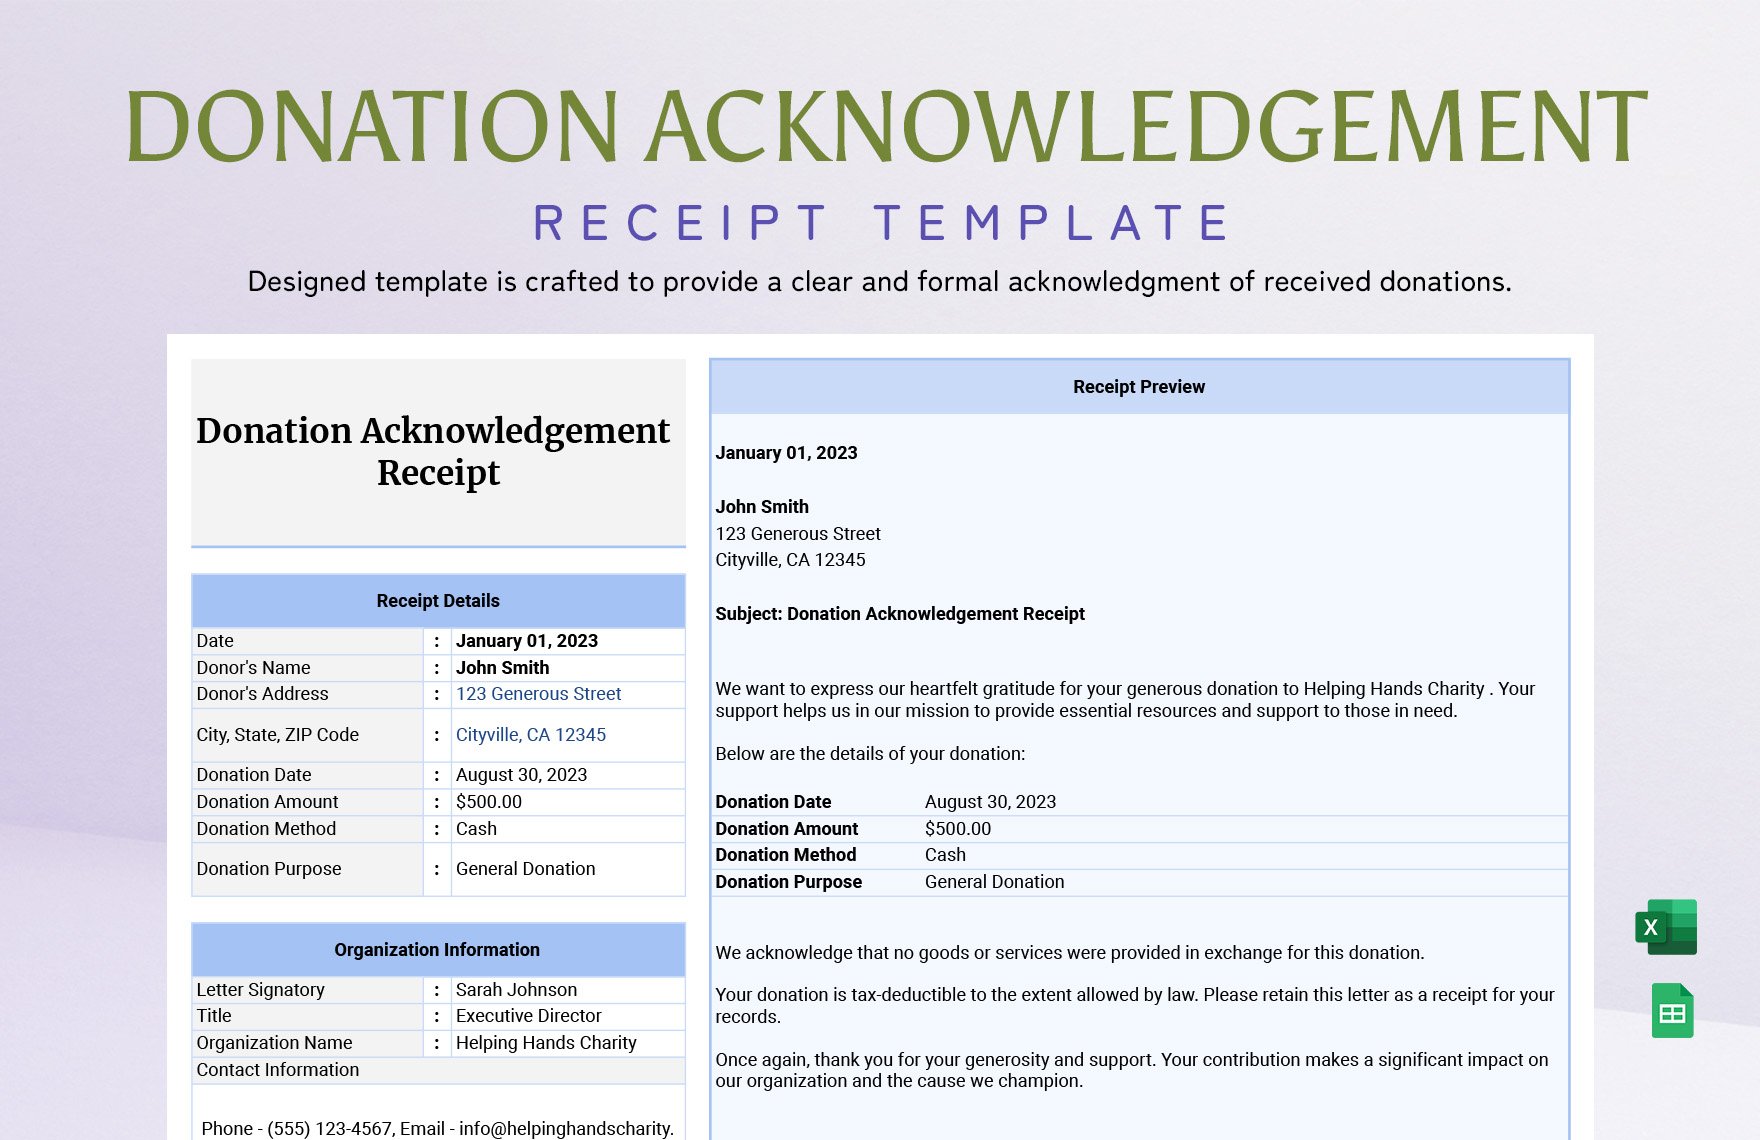 Donation Acknowledgment Receipt Template